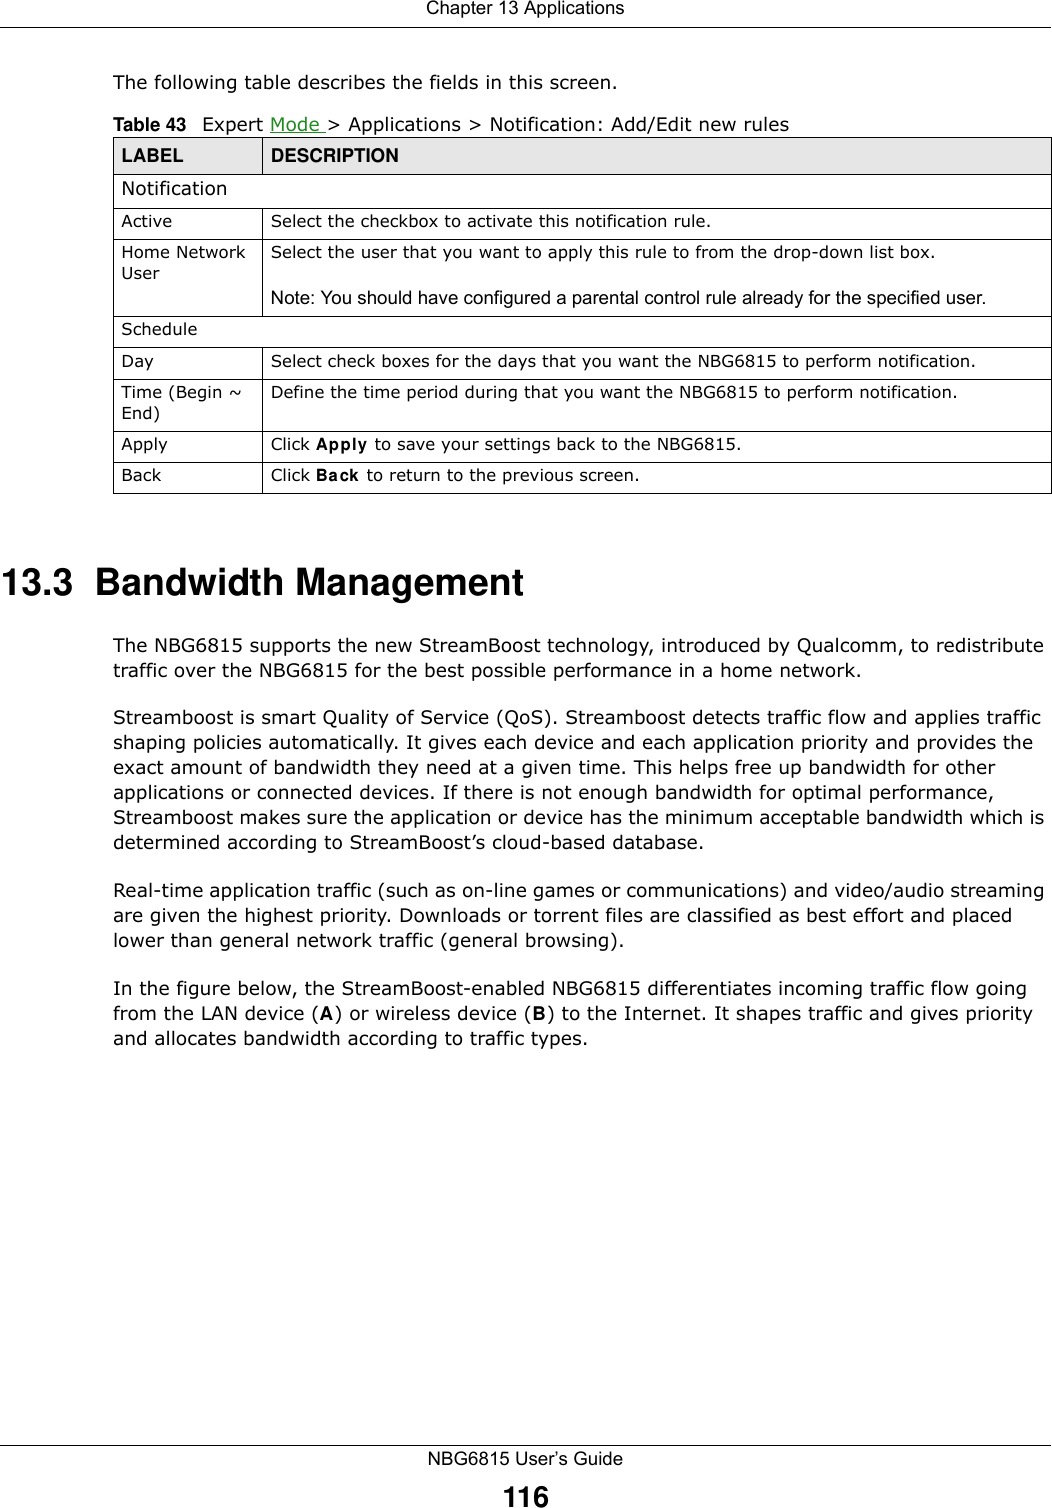 Chapter 13 ApplicationsNBG6815 User’s Guide116The following table describes the fields in this screen. 13.3  Bandwidth ManagementThe NBG6815 supports the new StreamBoost technology, introduced by Qualcomm, to redistribute traffic over the NBG6815 for the best possible performance in a home network. Streamboost is smart Quality of Service (QoS). Streamboost detects traffic flow and applies traffic shaping policies automatically. It gives each device and each application priority and provides the exact amount of bandwidth they need at a given time. This helps free up bandwidth for other applications or connected devices. If there is not enough bandwidth for optimal performance, Streamboost makes sure the application or device has the minimum acceptable bandwidth which is determined according to StreamBoost’s cloud-based database. Real-time application traffic (such as on-line games or communications) and video/audio streaming are given the highest priority. Downloads or torrent files are classified as best effort and placed lower than general network traffic (general browsing).In the figure below, the StreamBoost-enabled NBG6815 differentiates incoming traffic flow going from the LAN device (A) or wireless device (B) to the Internet. It shapes traffic and gives priority and allocates bandwidth according to traffic types.Table 43   Expert Mode &gt; Applications &gt; Notification: Add/Edit new rulesLABEL DESCRIPTIONNotificationActive Select the checkbox to activate this notification rule.Home Network UserSelect the user that you want to apply this rule to from the drop-down list box.Note: You should have configured a parental control rule already for the specified user.ScheduleDay Select check boxes for the days that you want the NBG6815 to perform notification. Time (Begin ~ End)Define the time period during that you want the NBG6815 to perform notification.Apply Click Apply to save your settings back to the NBG6815.Back Click Back to return to the previous screen.